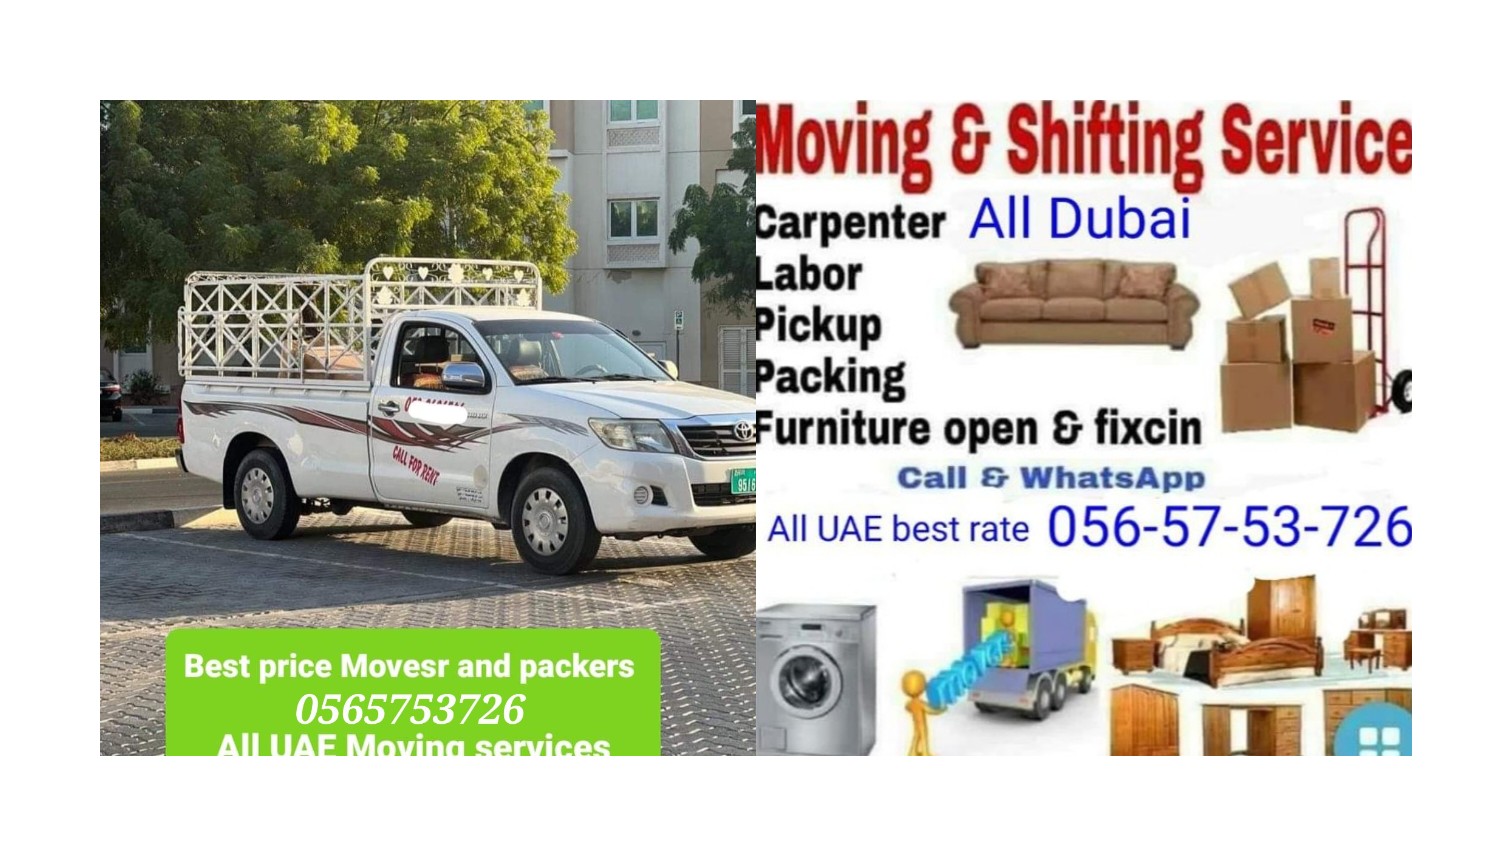 Best Price Movers And Packers 056 57 53 726